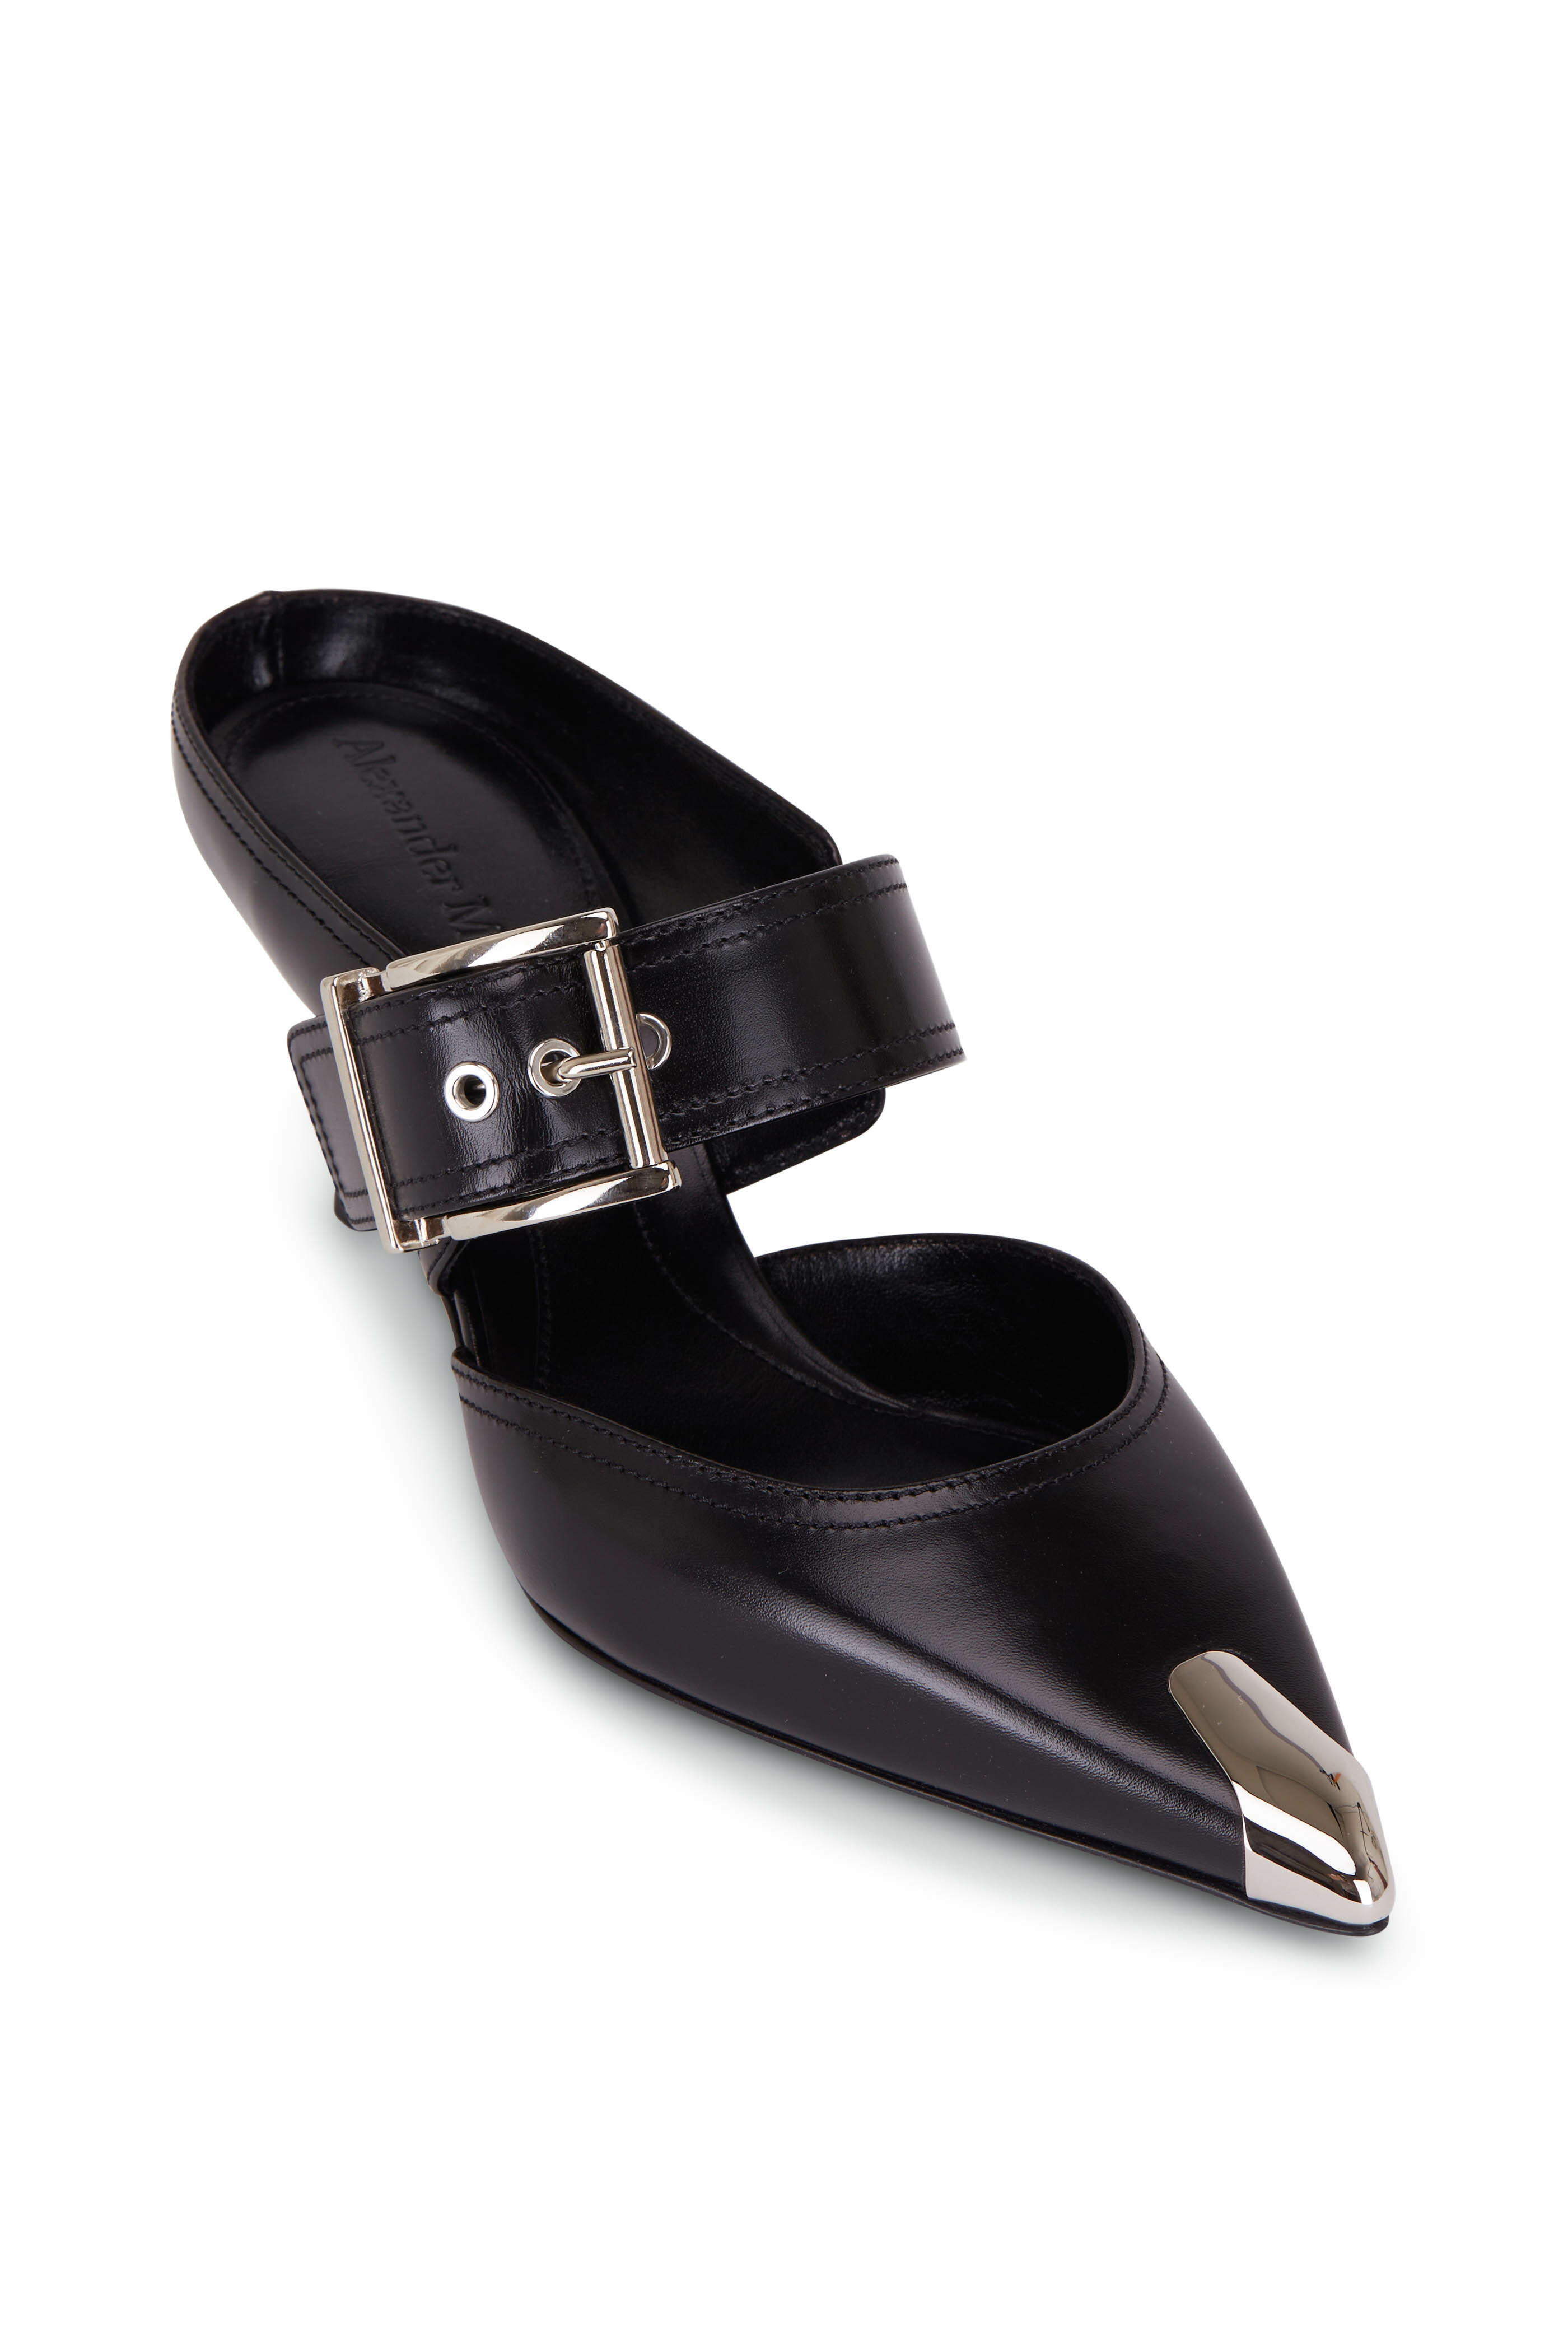 Alexander McQueen white Bow black leather heeled sandals.